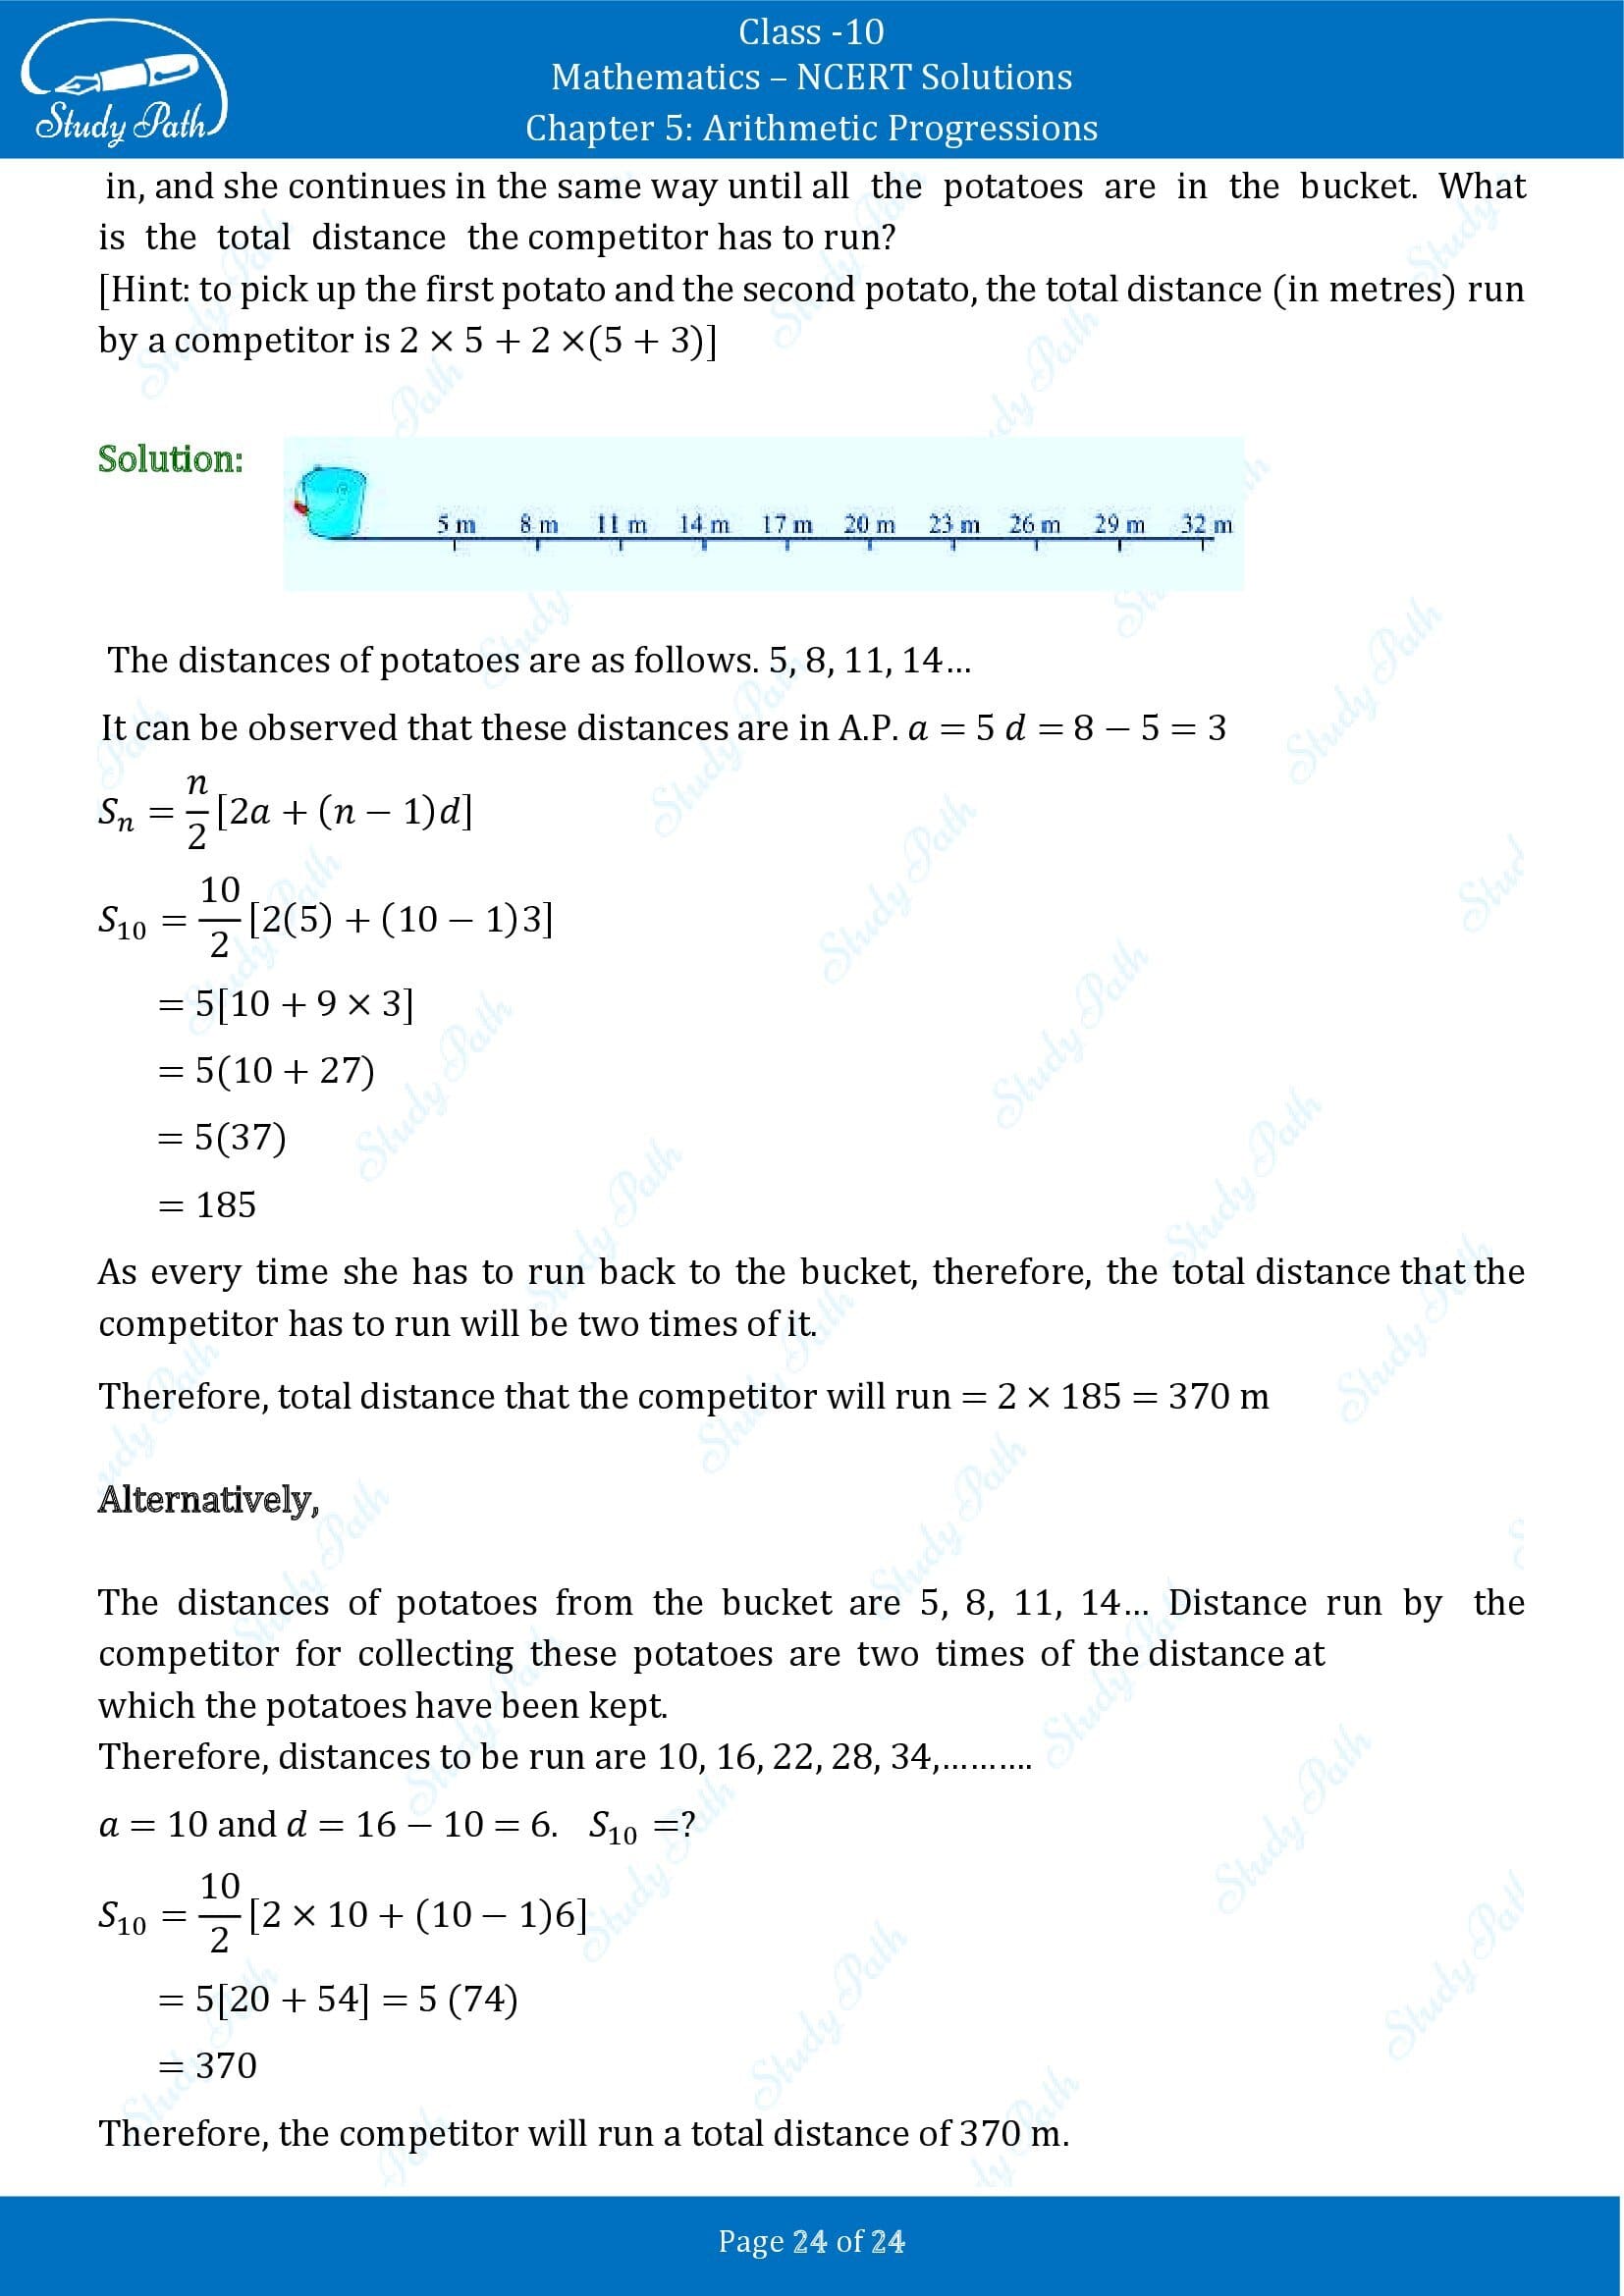 NCERT Solutions for Class 10 Maths Chapter 5 Arithmetic Progressions Exercise 5.3 00024